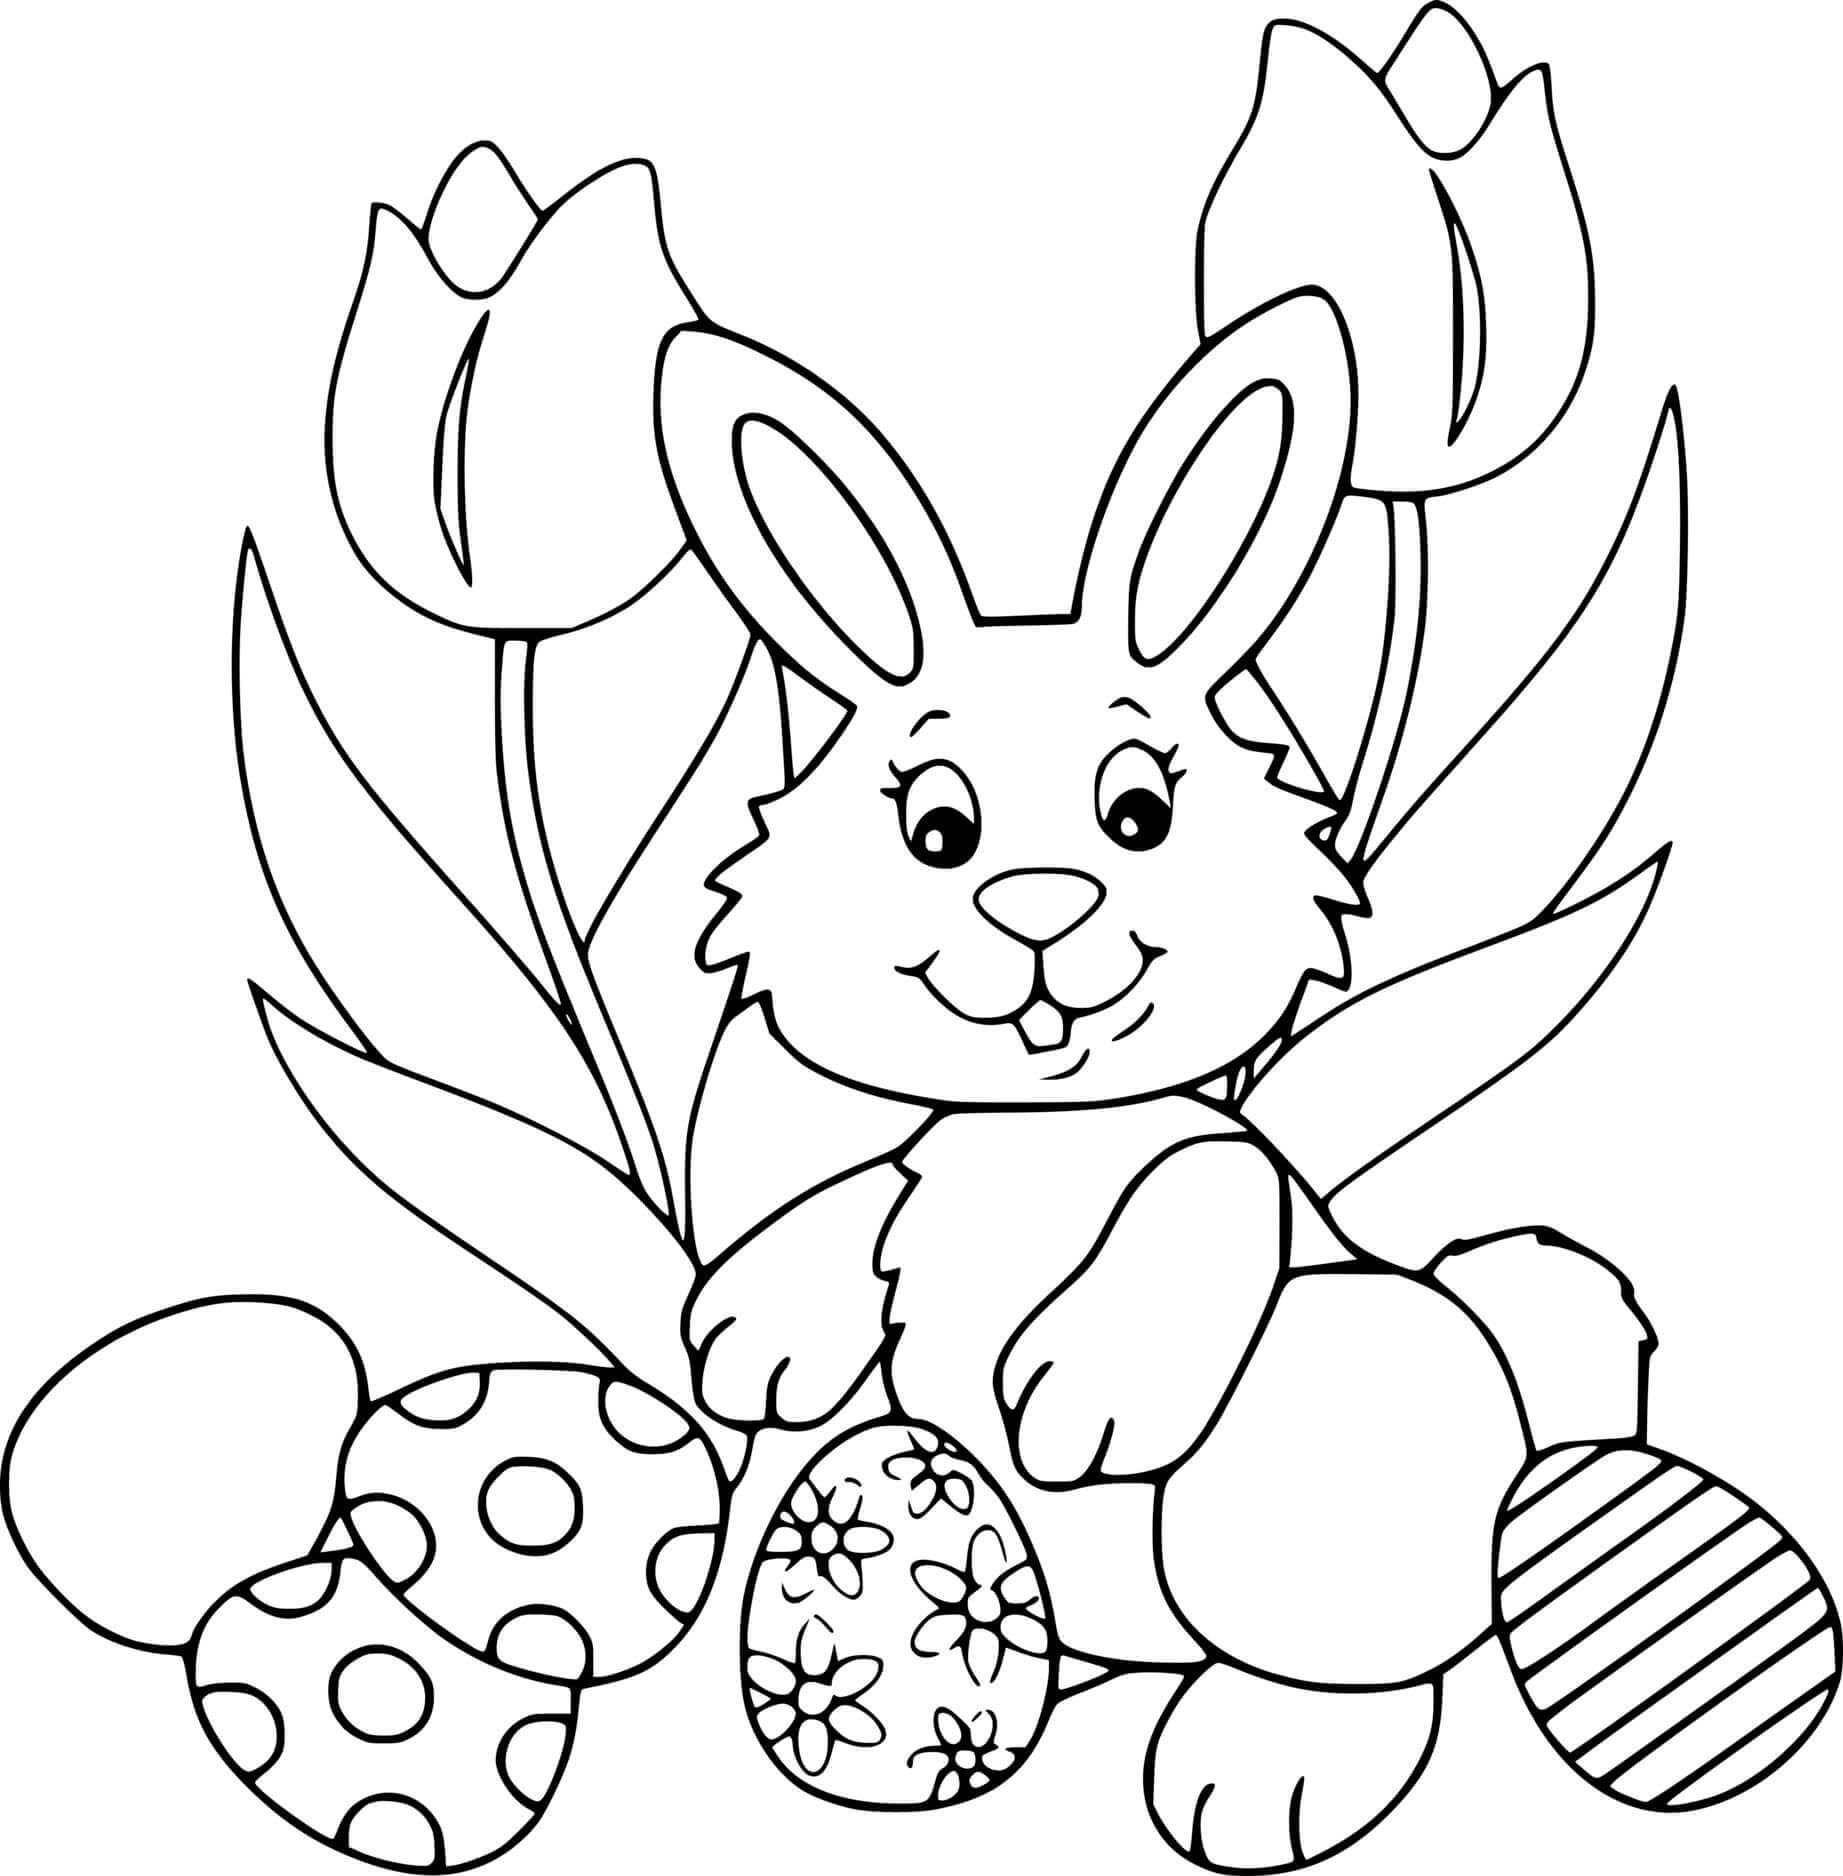 Bunny With Flowers And Eggs Coloring Page